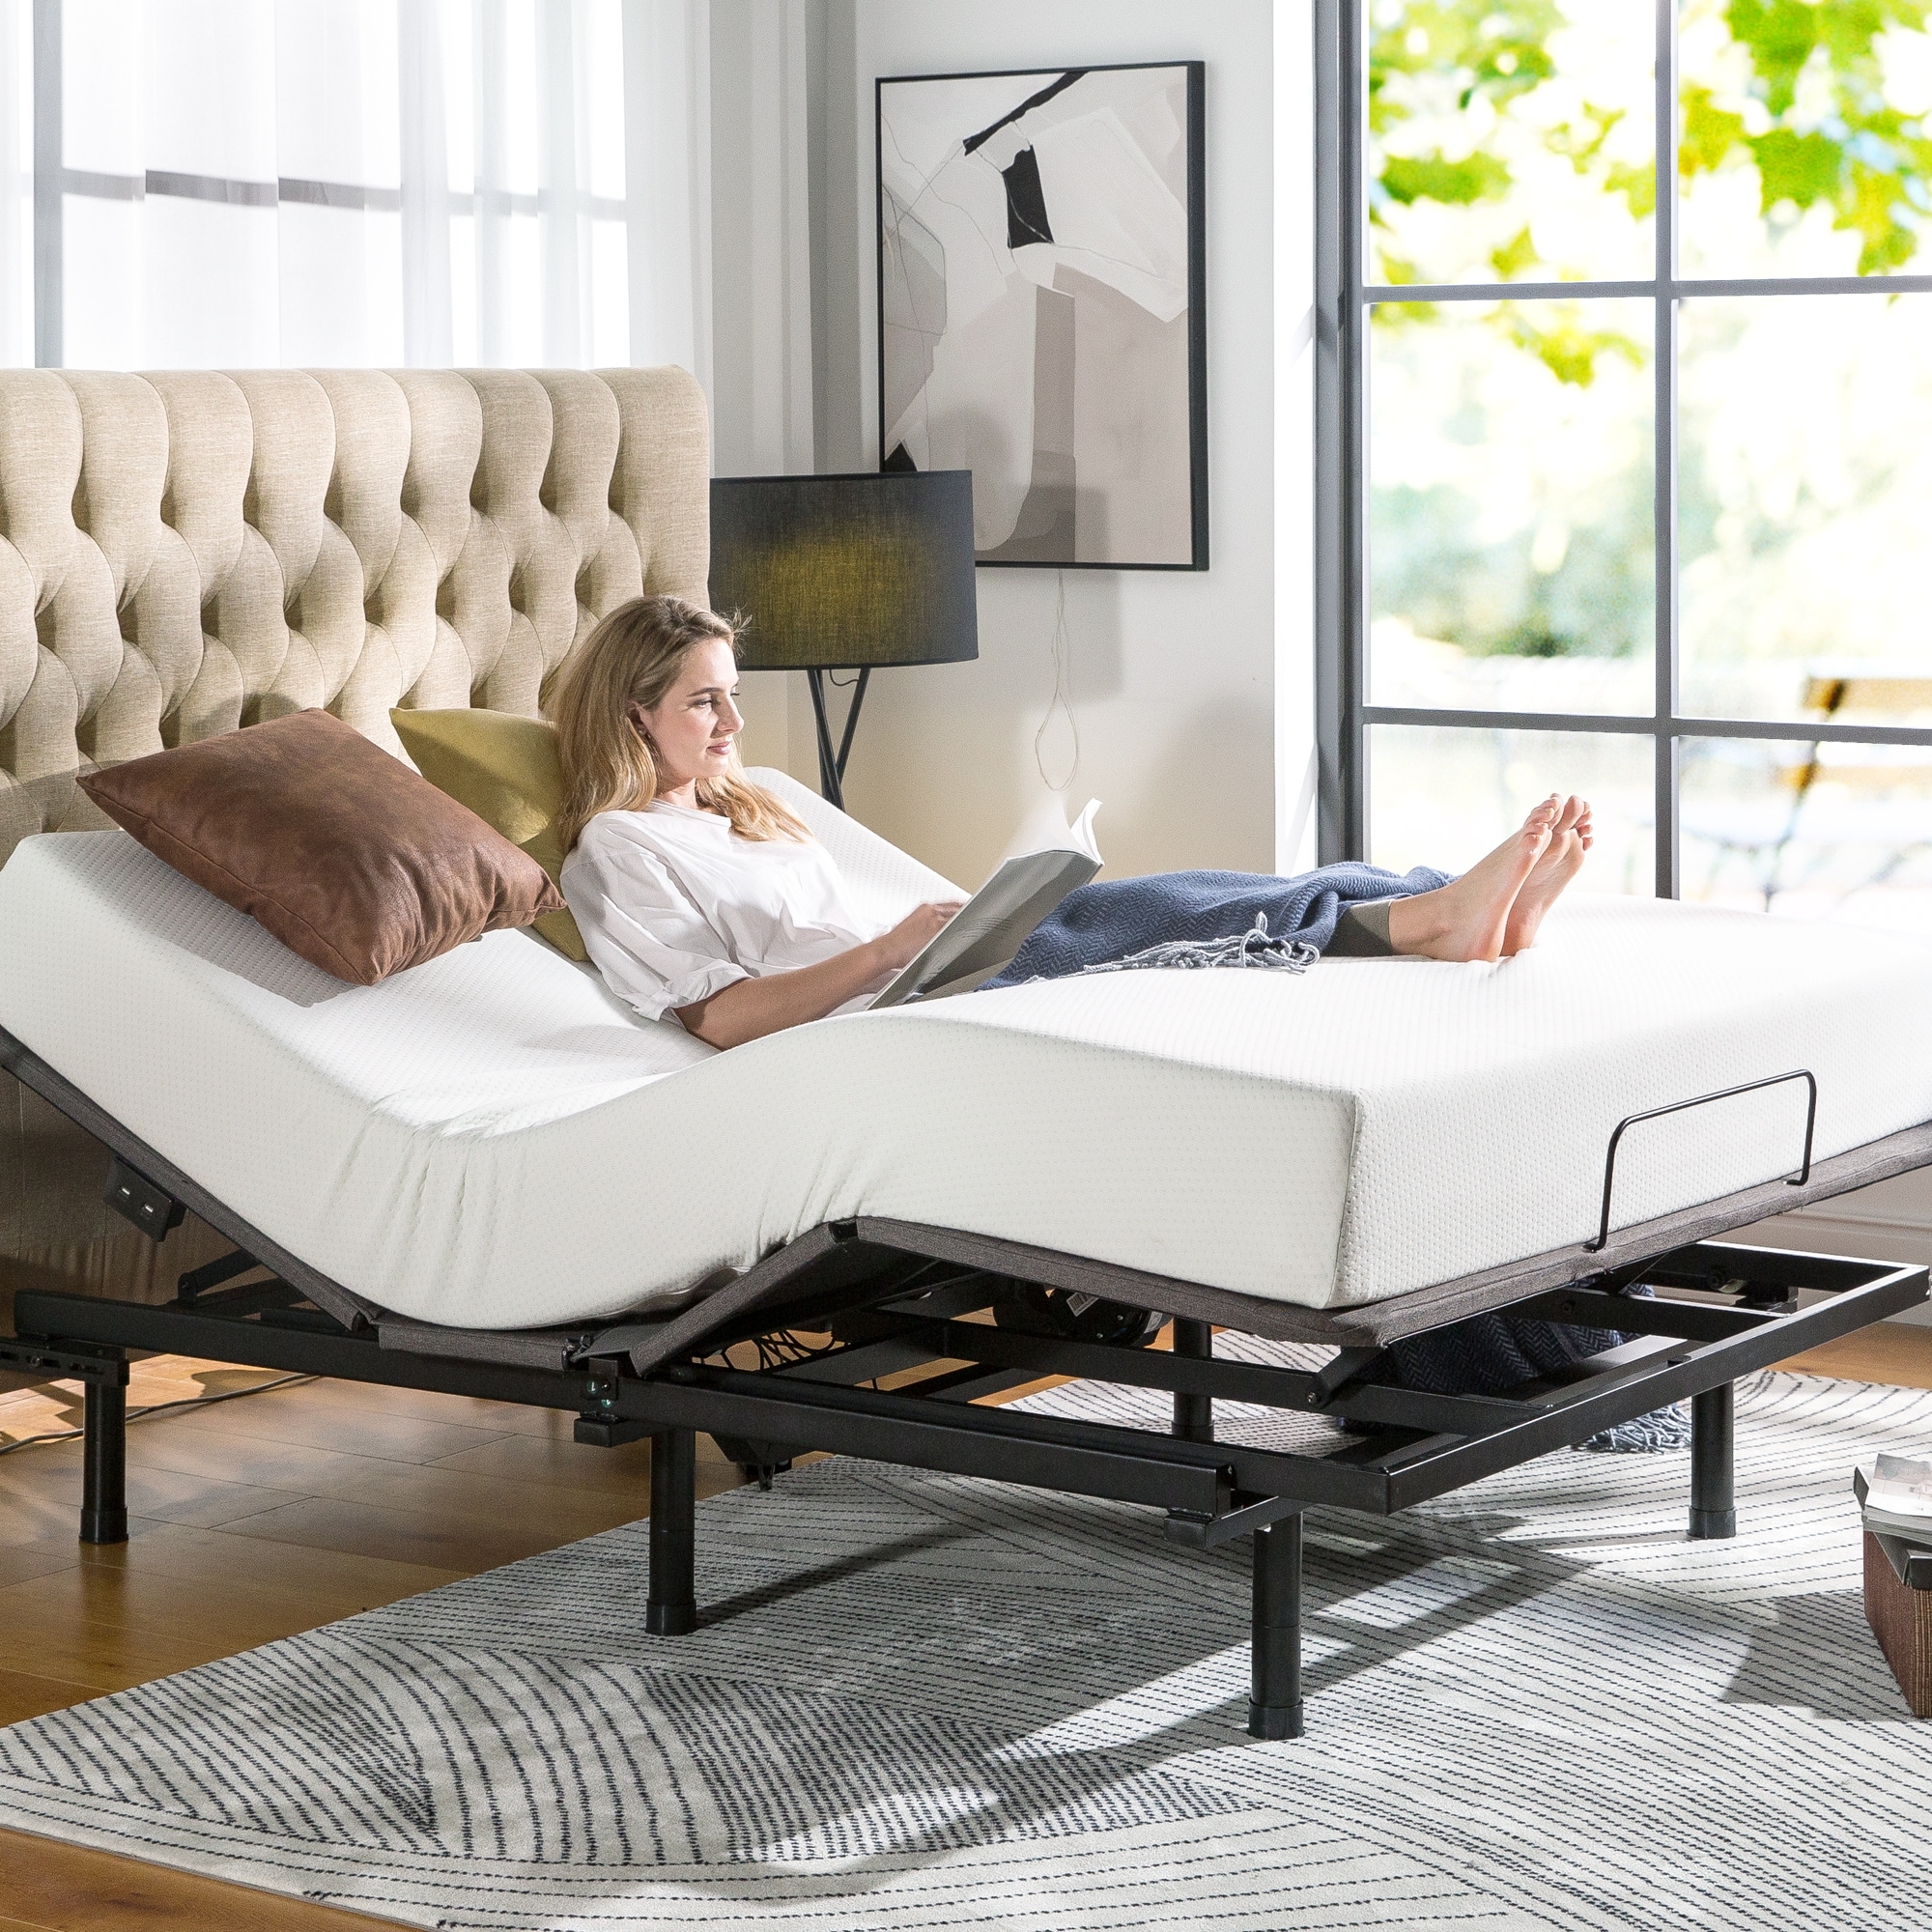 Unlock the Benefits of an Adjustable Bed: How Does It Work?